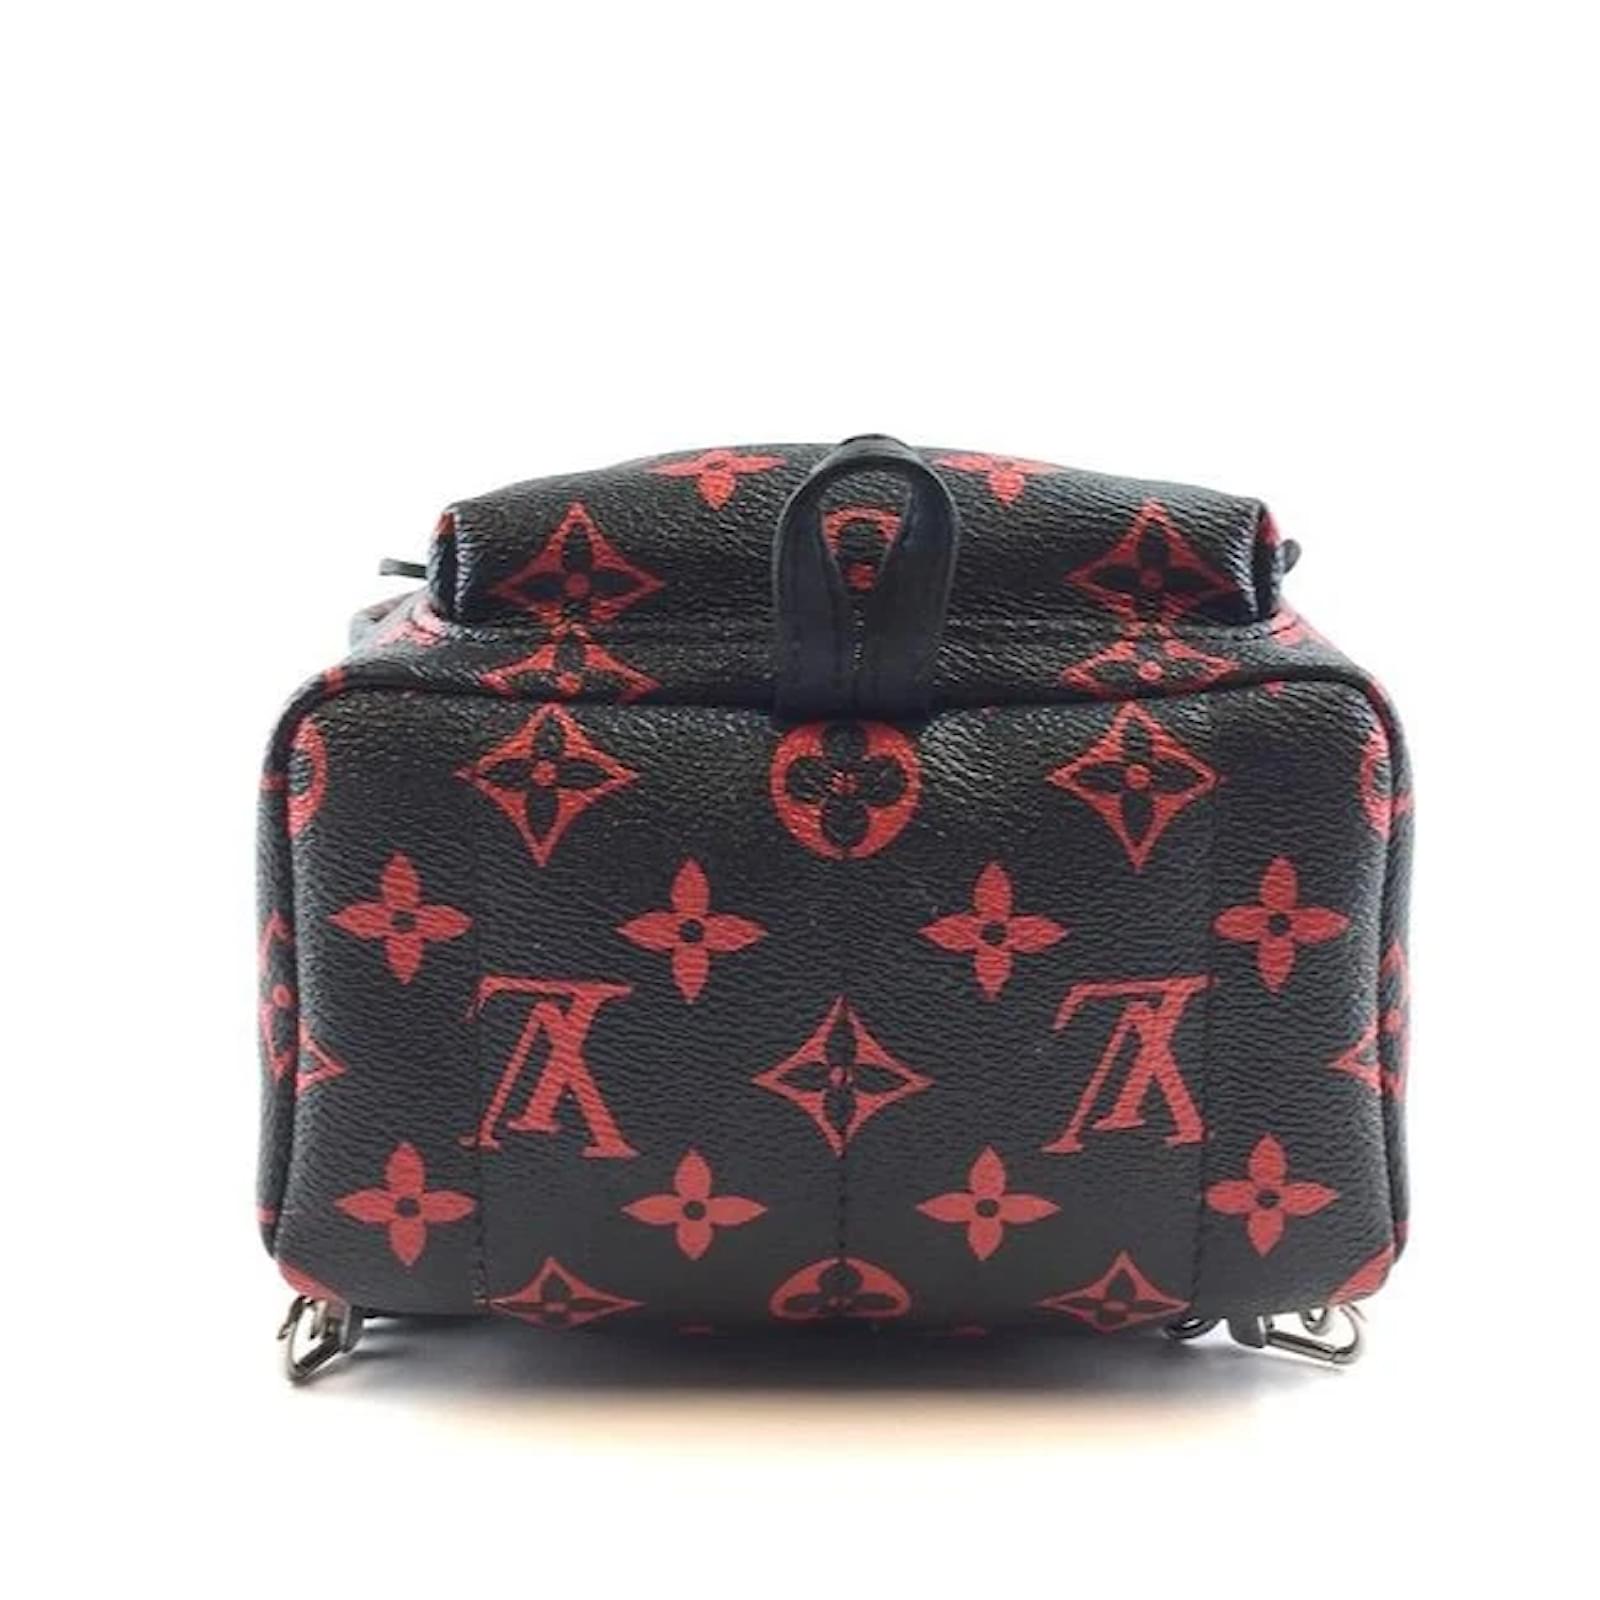 louis vuitton mini backpack black and red